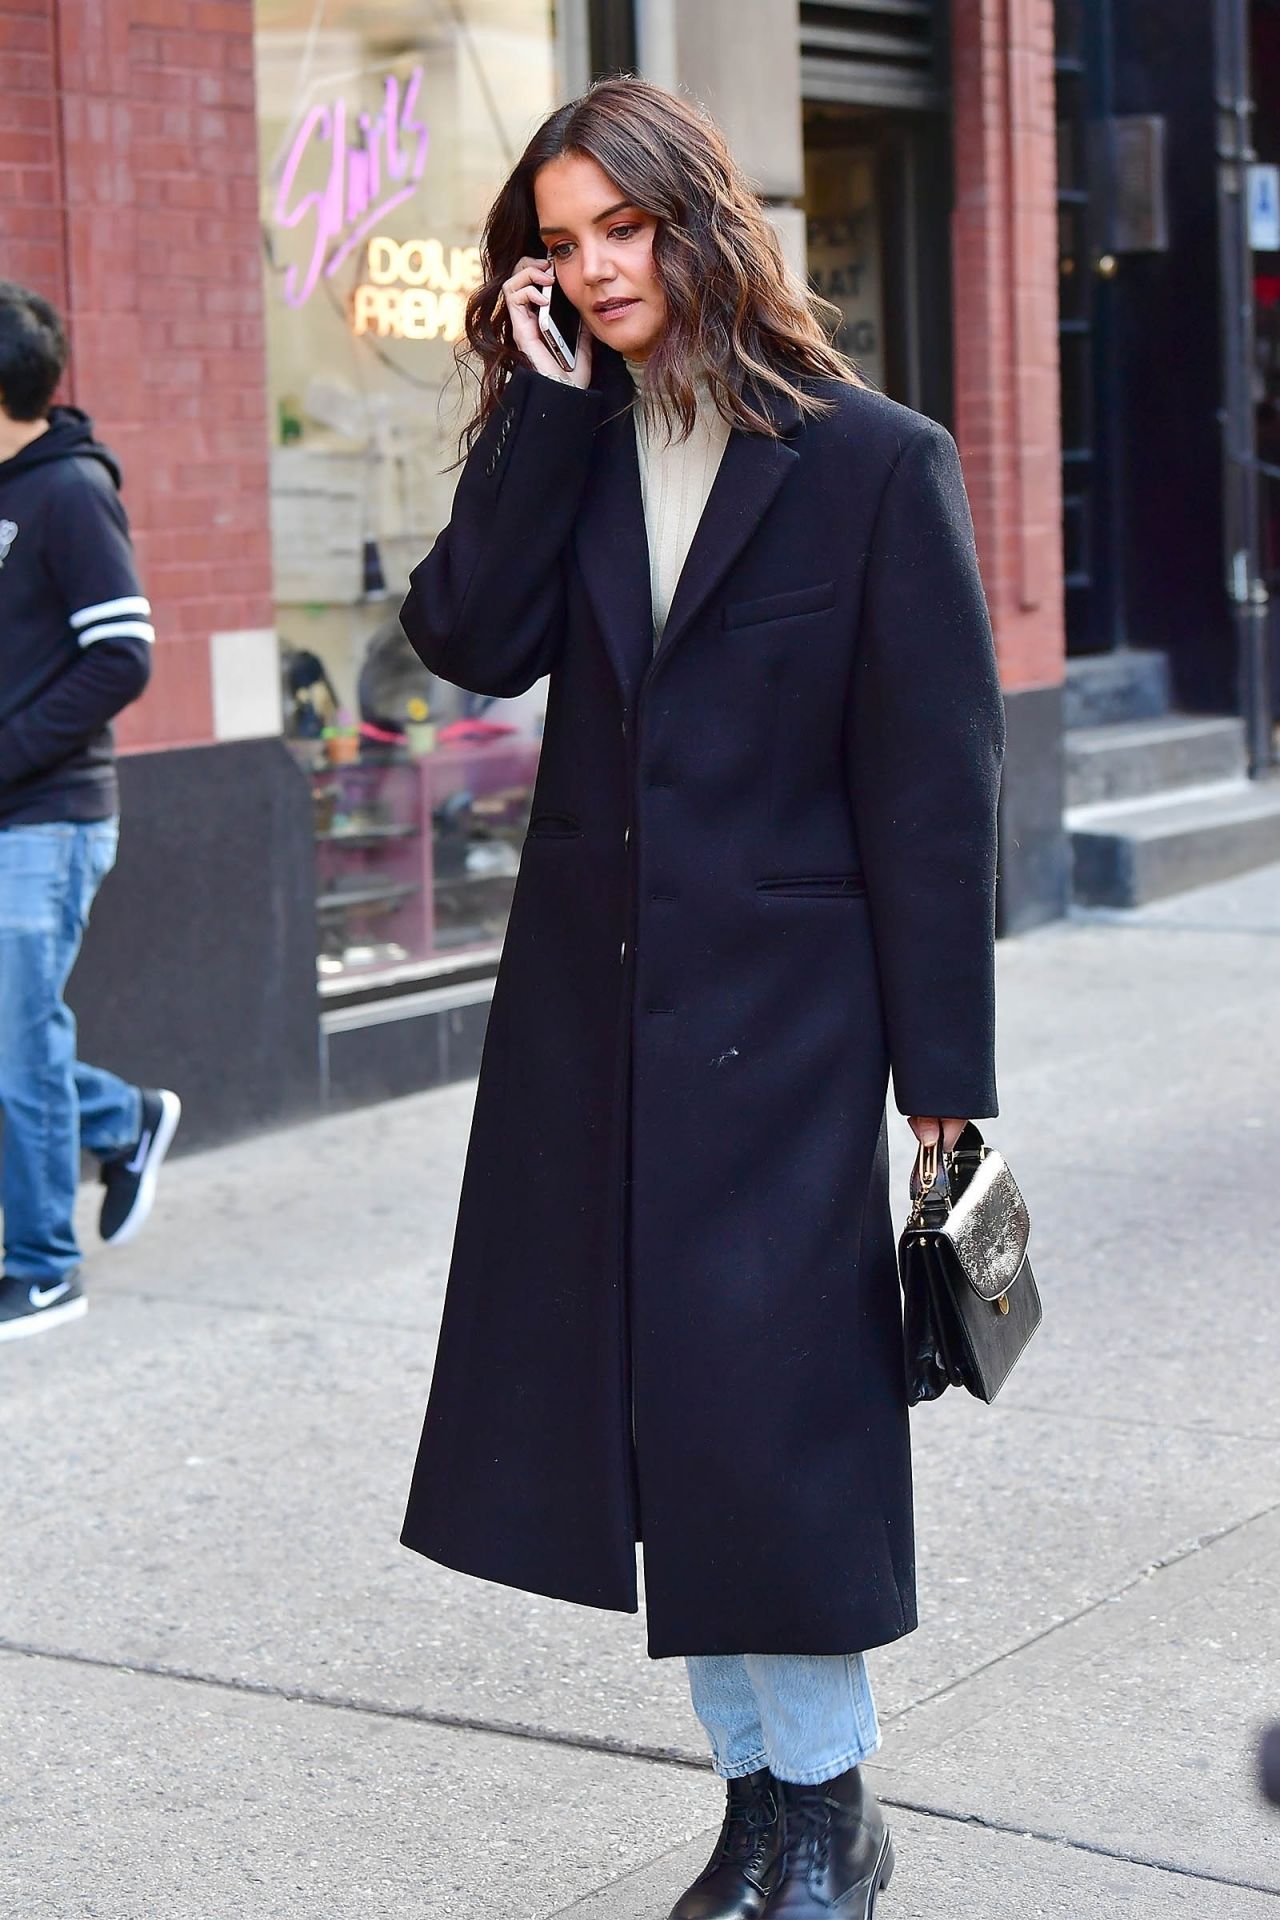 Katie Holmes New York City October 7, 2019 – Star Style